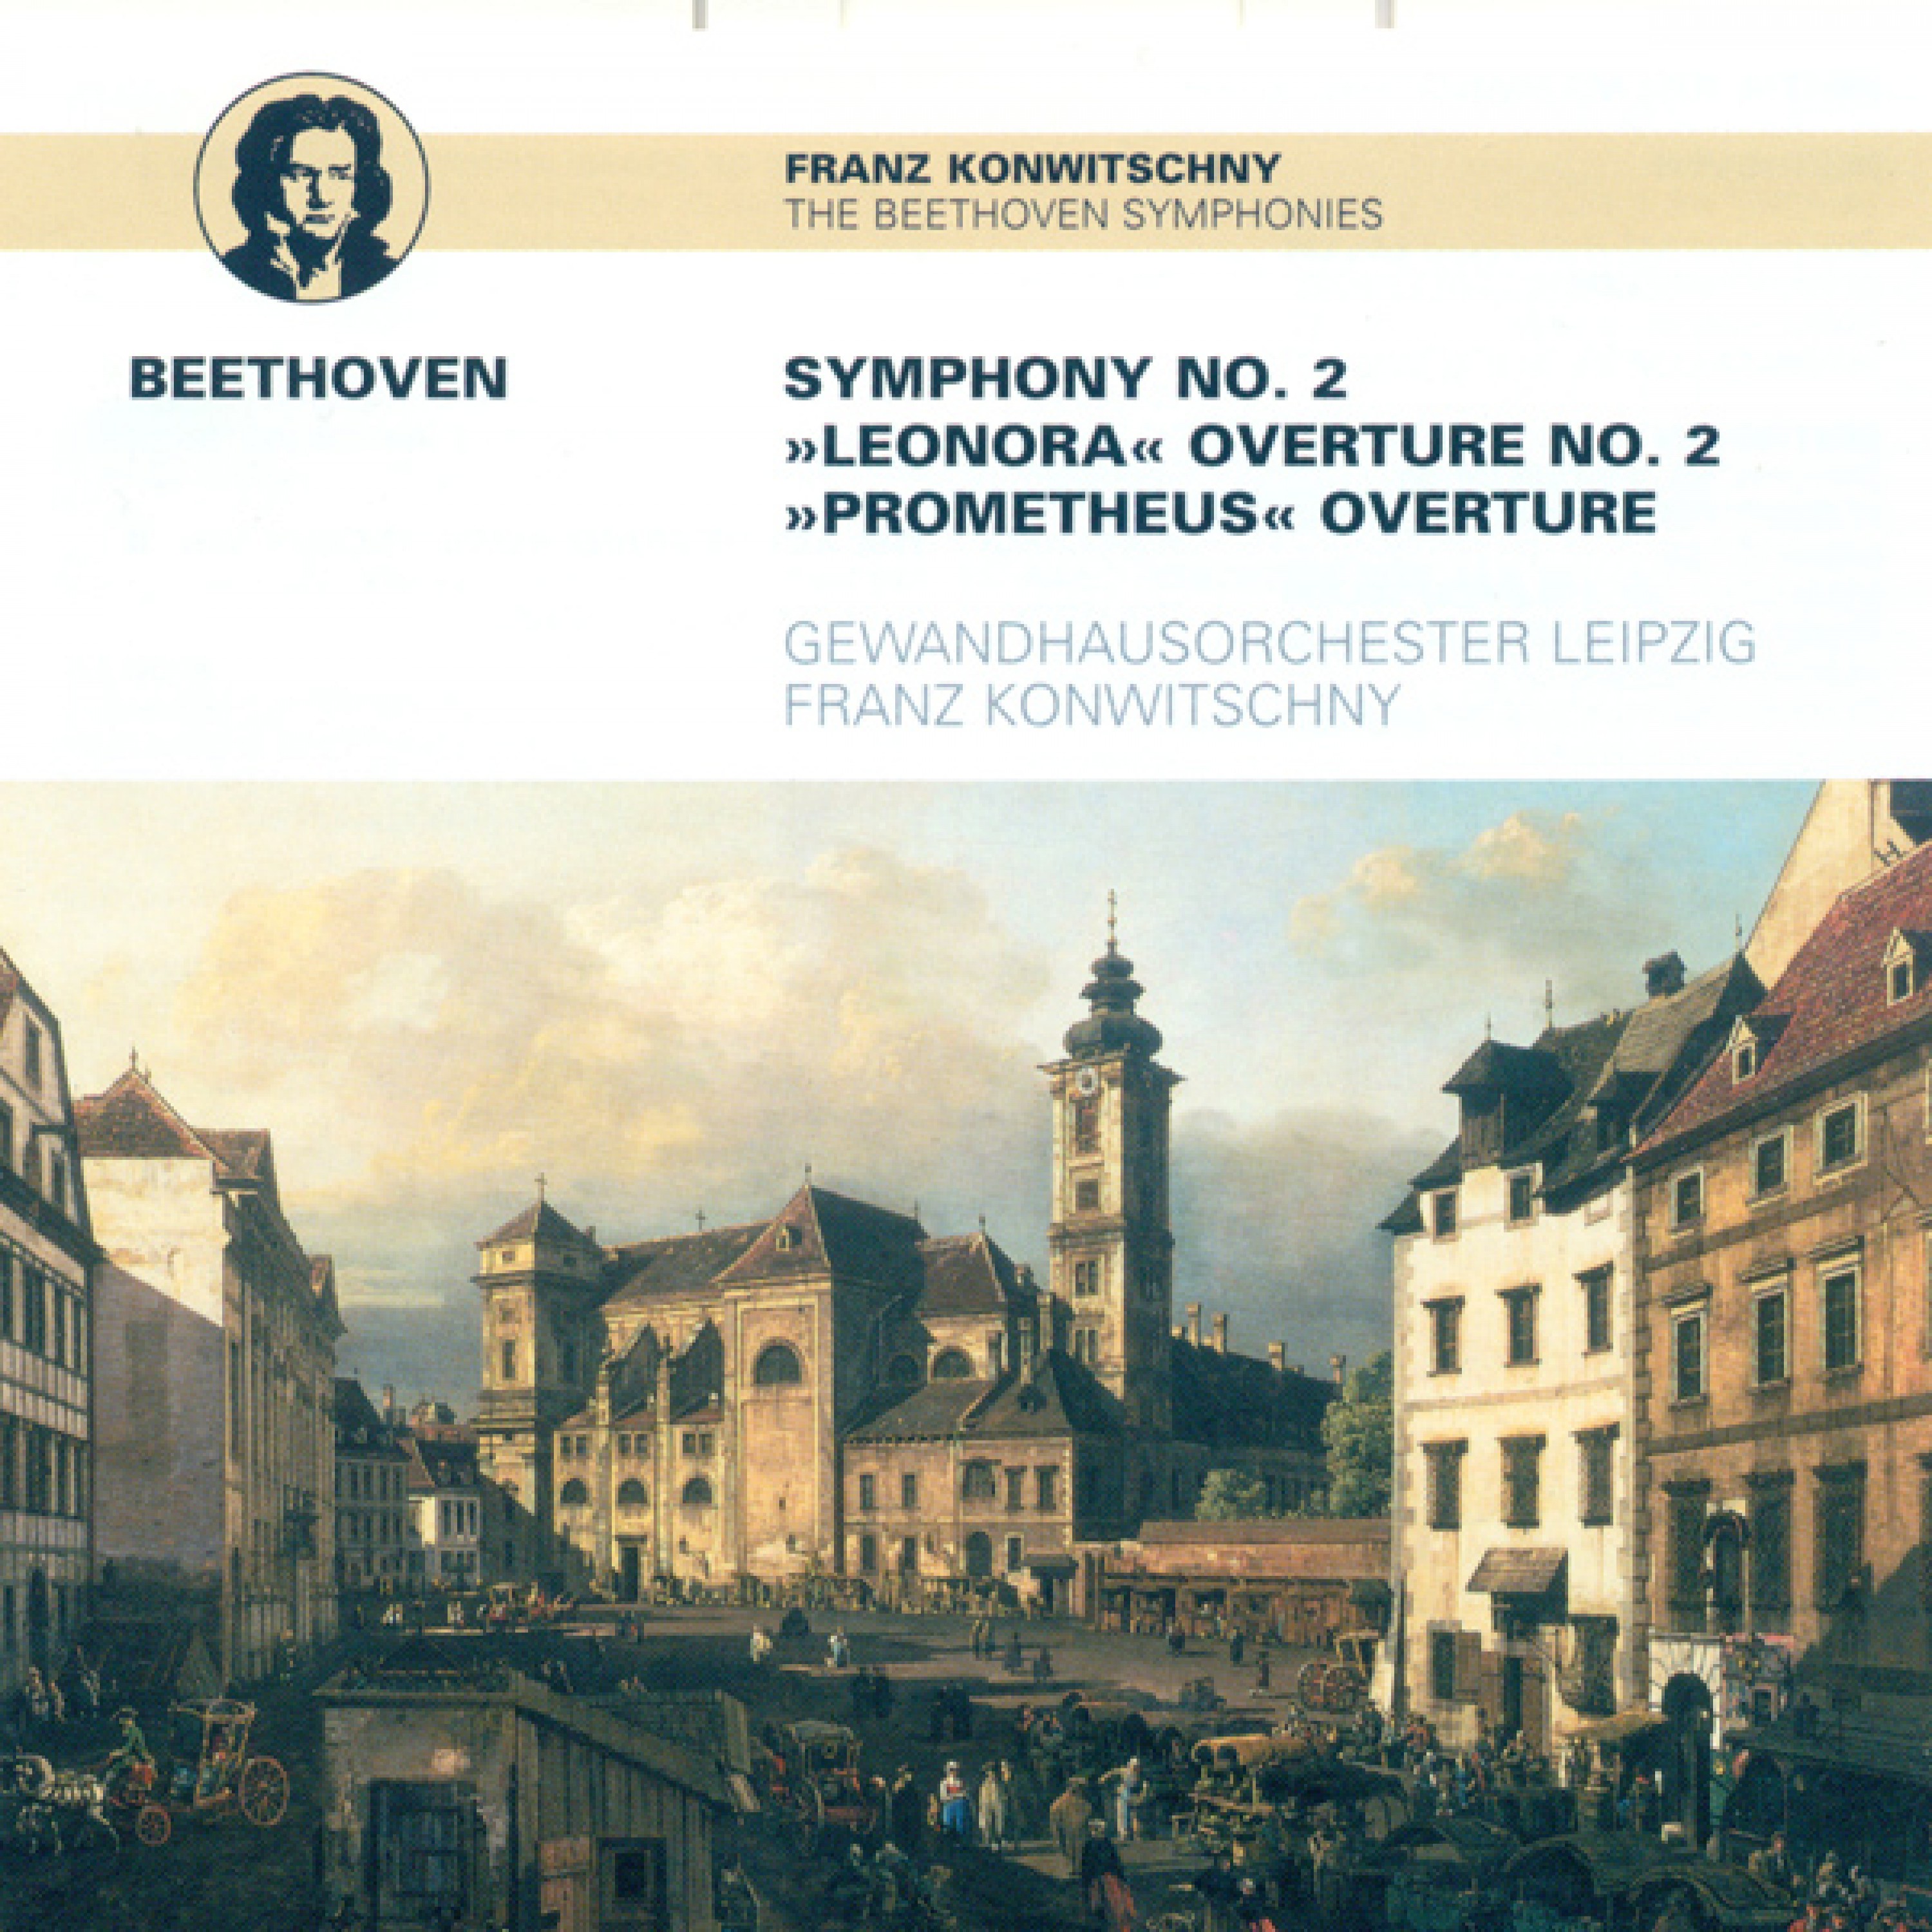 Ludwig van Beethoven: Symphony No. 2 / Leonore Overture No. 2 / The Creatures of Prometheus (Leipzig Gewandhaus Orchestra, Konwitschny)